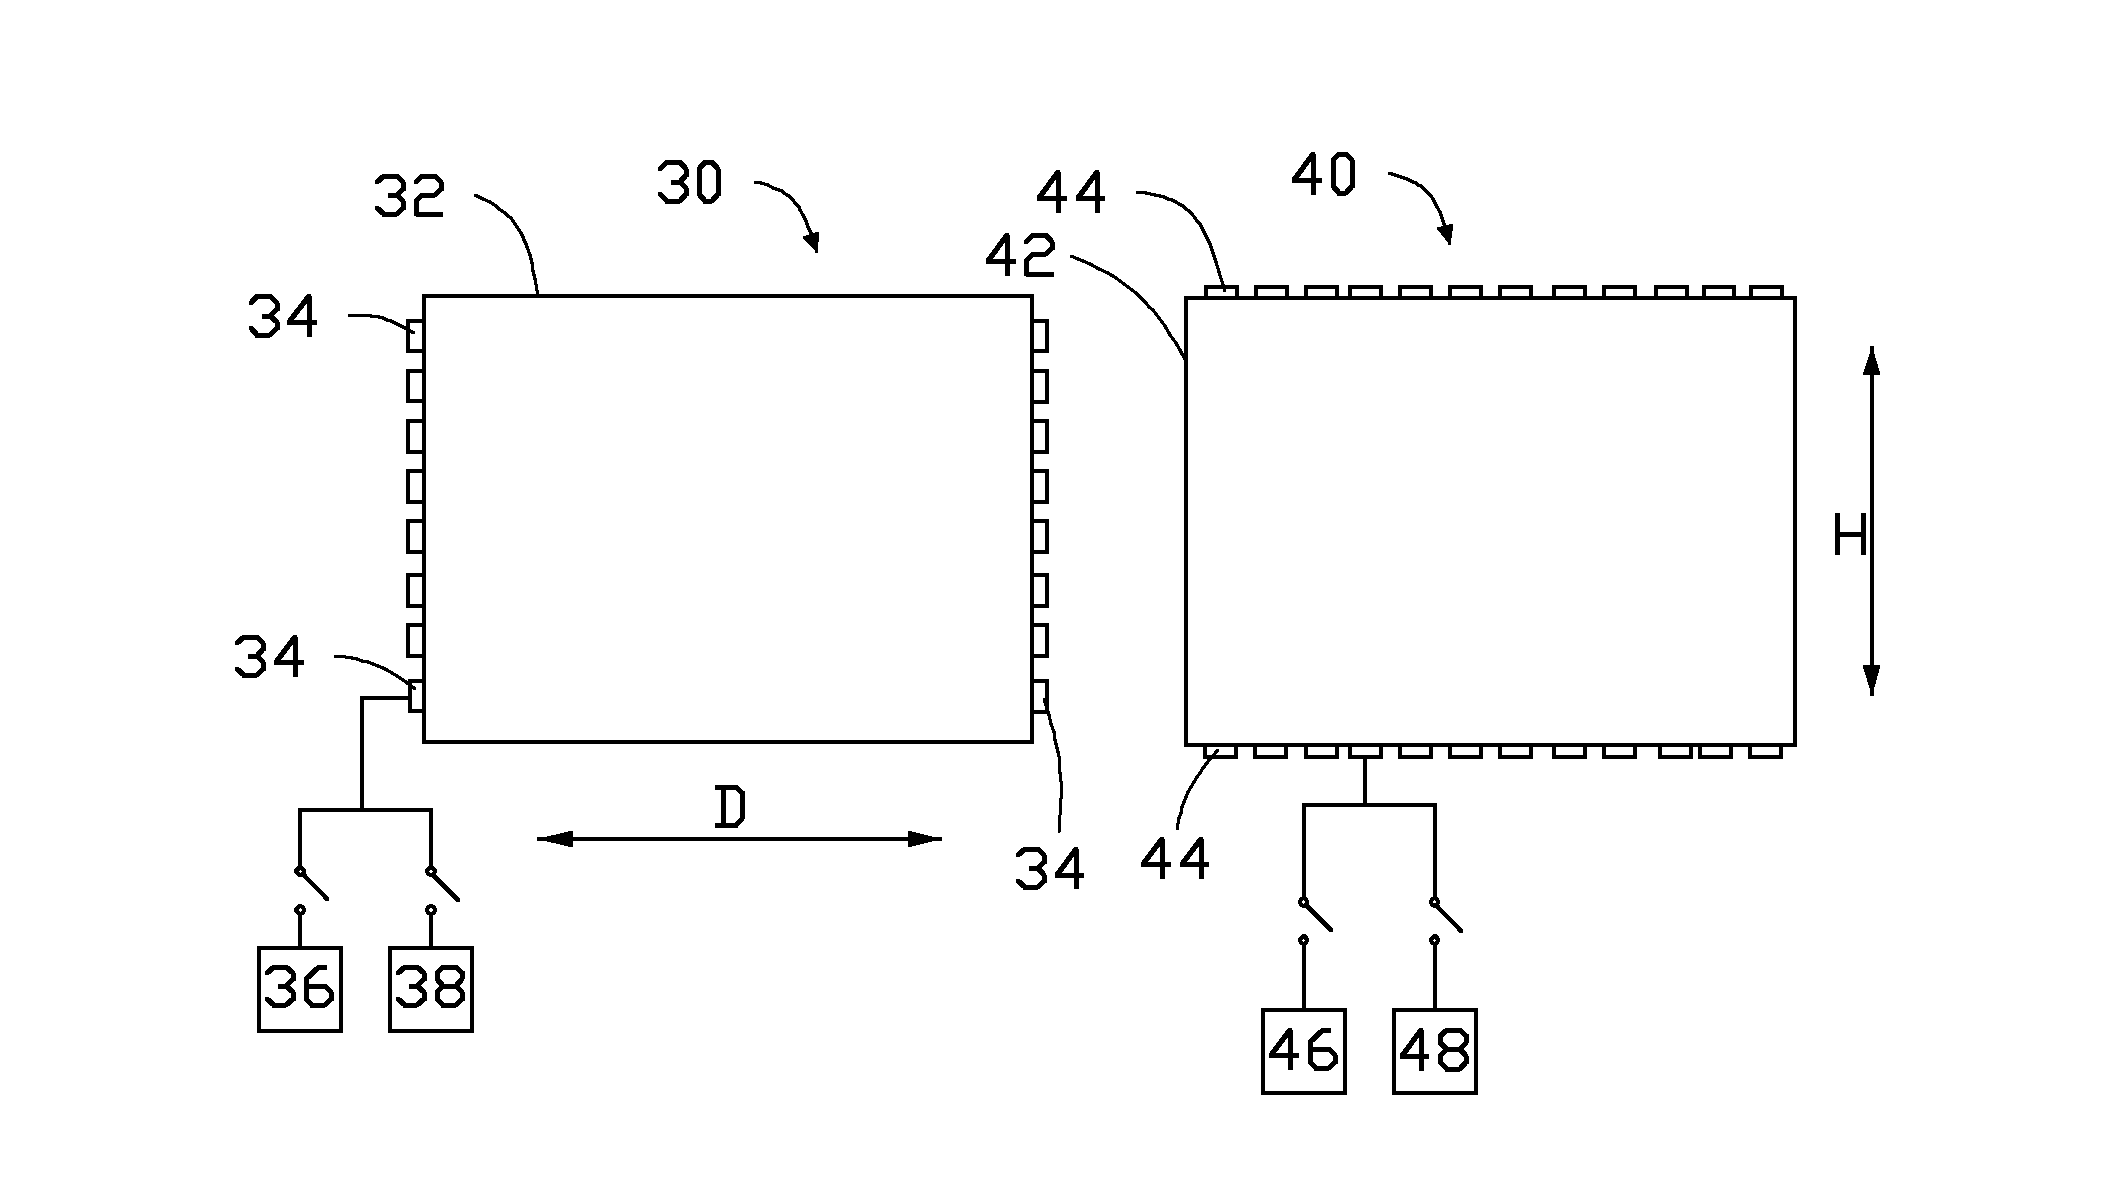 Sensing method based on capacitive touch panel